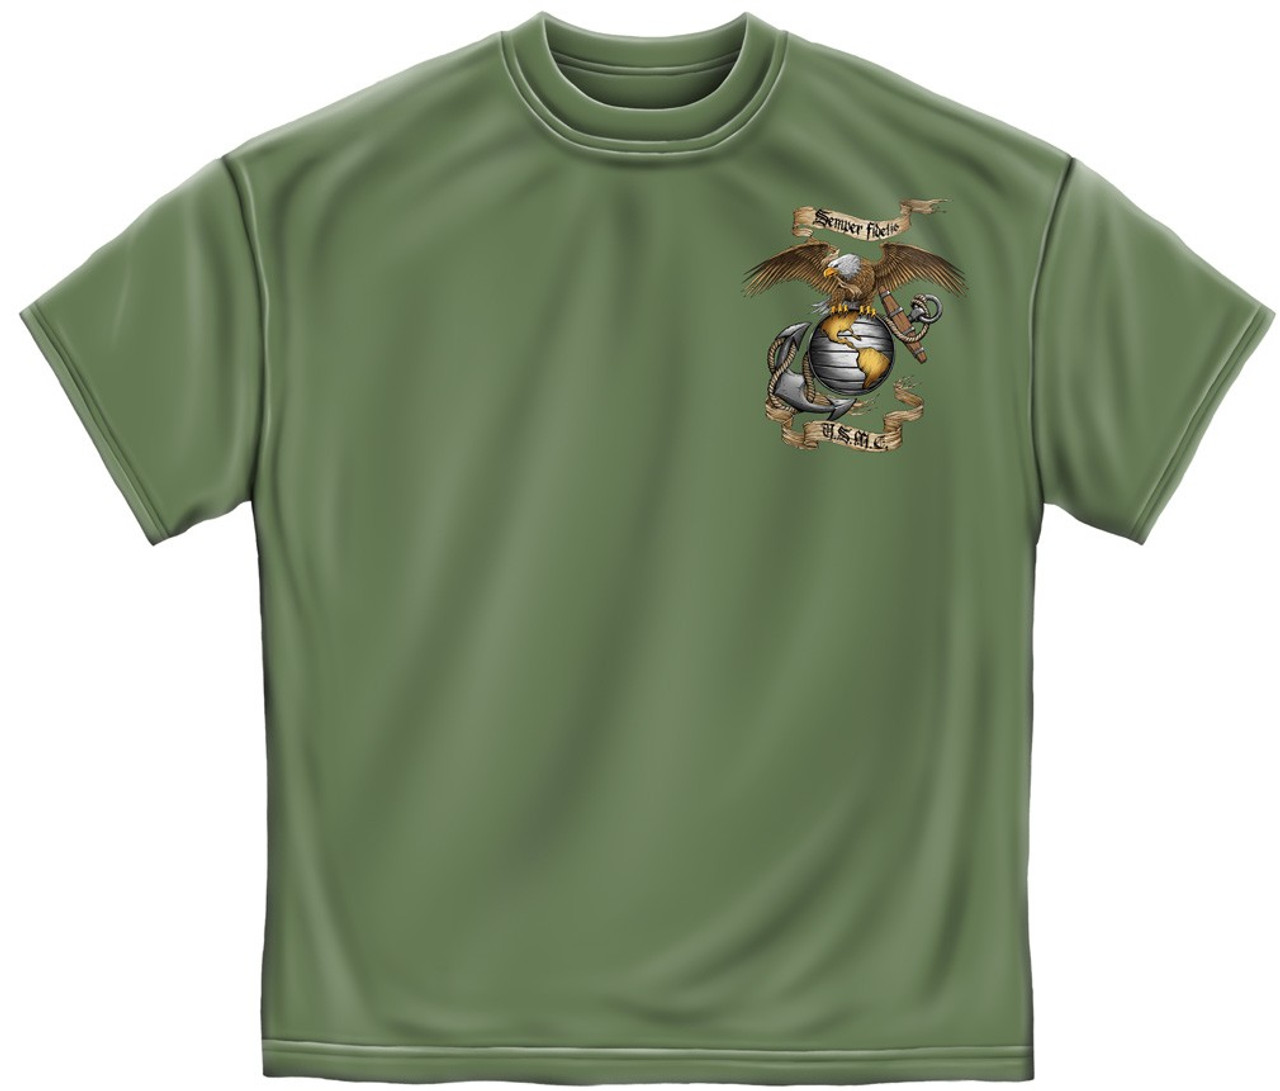 **(LICENSED-U.S.MARINES-CORPS,SEMPER-FIDELIS/WITH-MARINES-GLOBE & ANCHOR-EMBLEM/U.S.M.C,NICE-DETAILED-GRAPHIC-PRINTED-DOUBLE-SIDED/PREMIUM-MARINES-GREEN-TEES:)** 